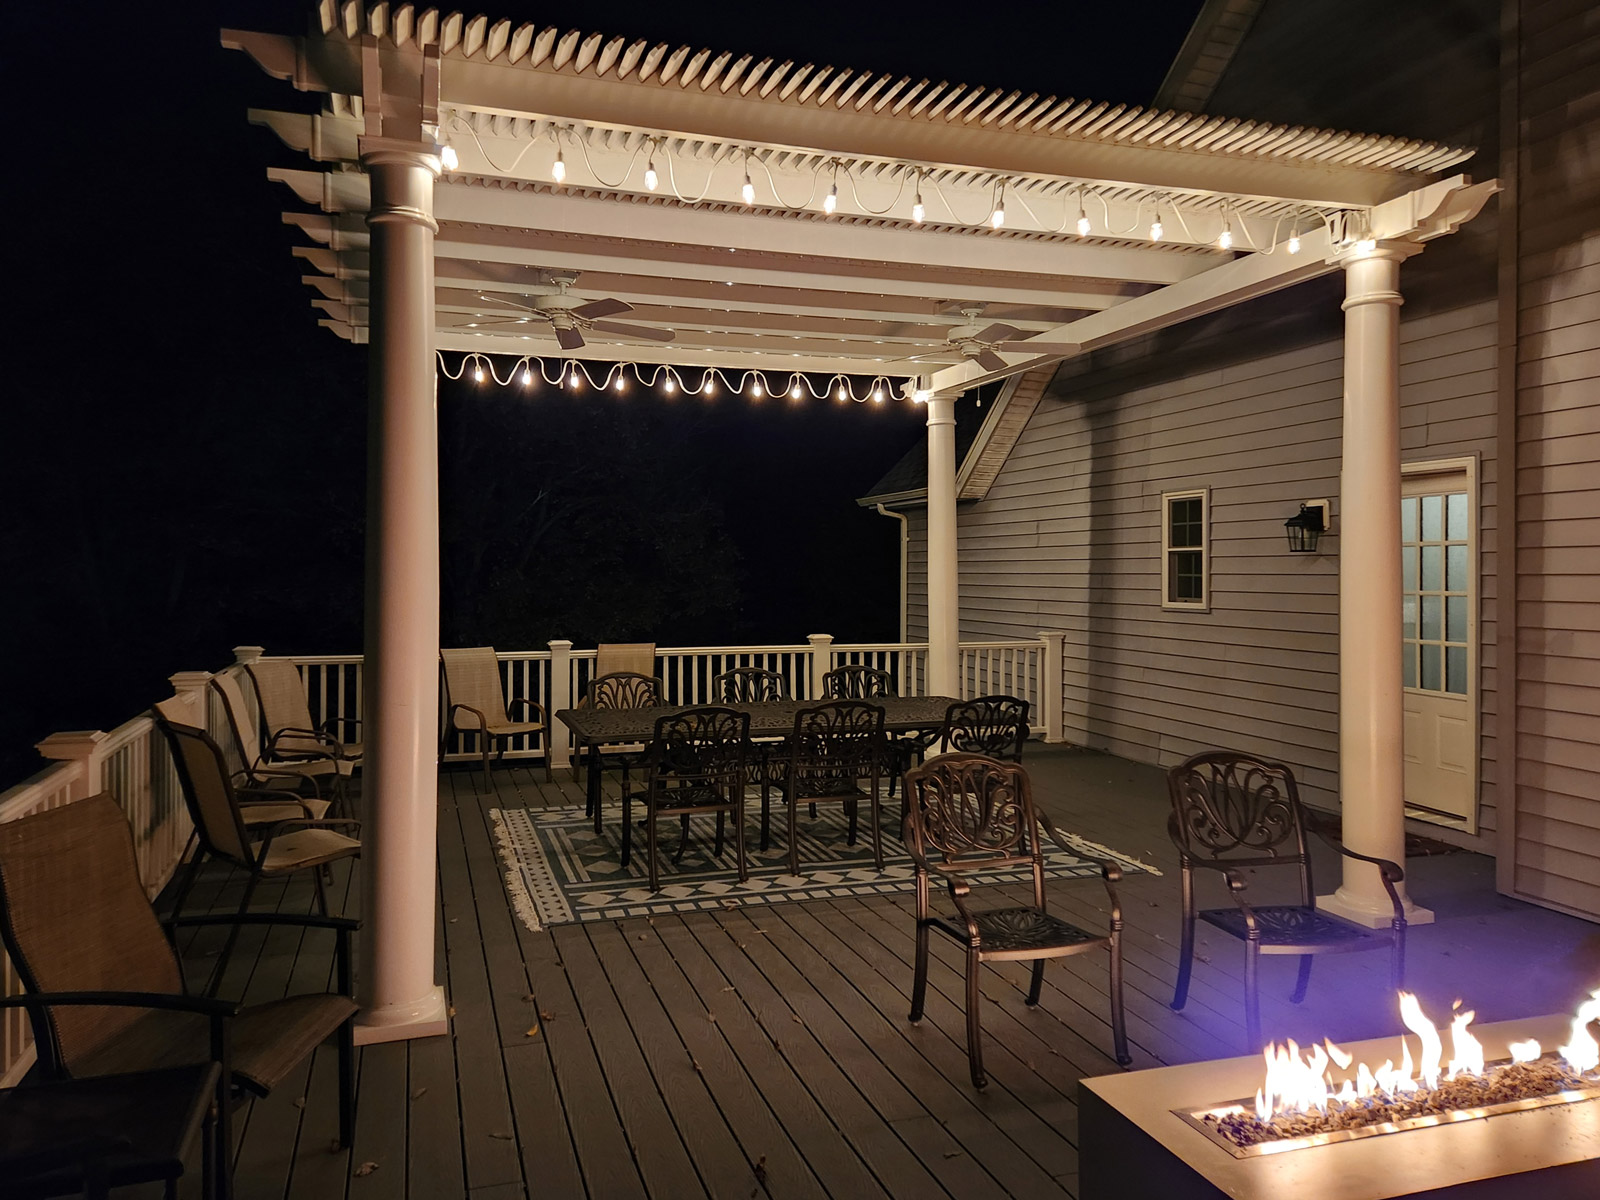 Pergola on deck lit up with bistro lights above outdoor dining table on a deck